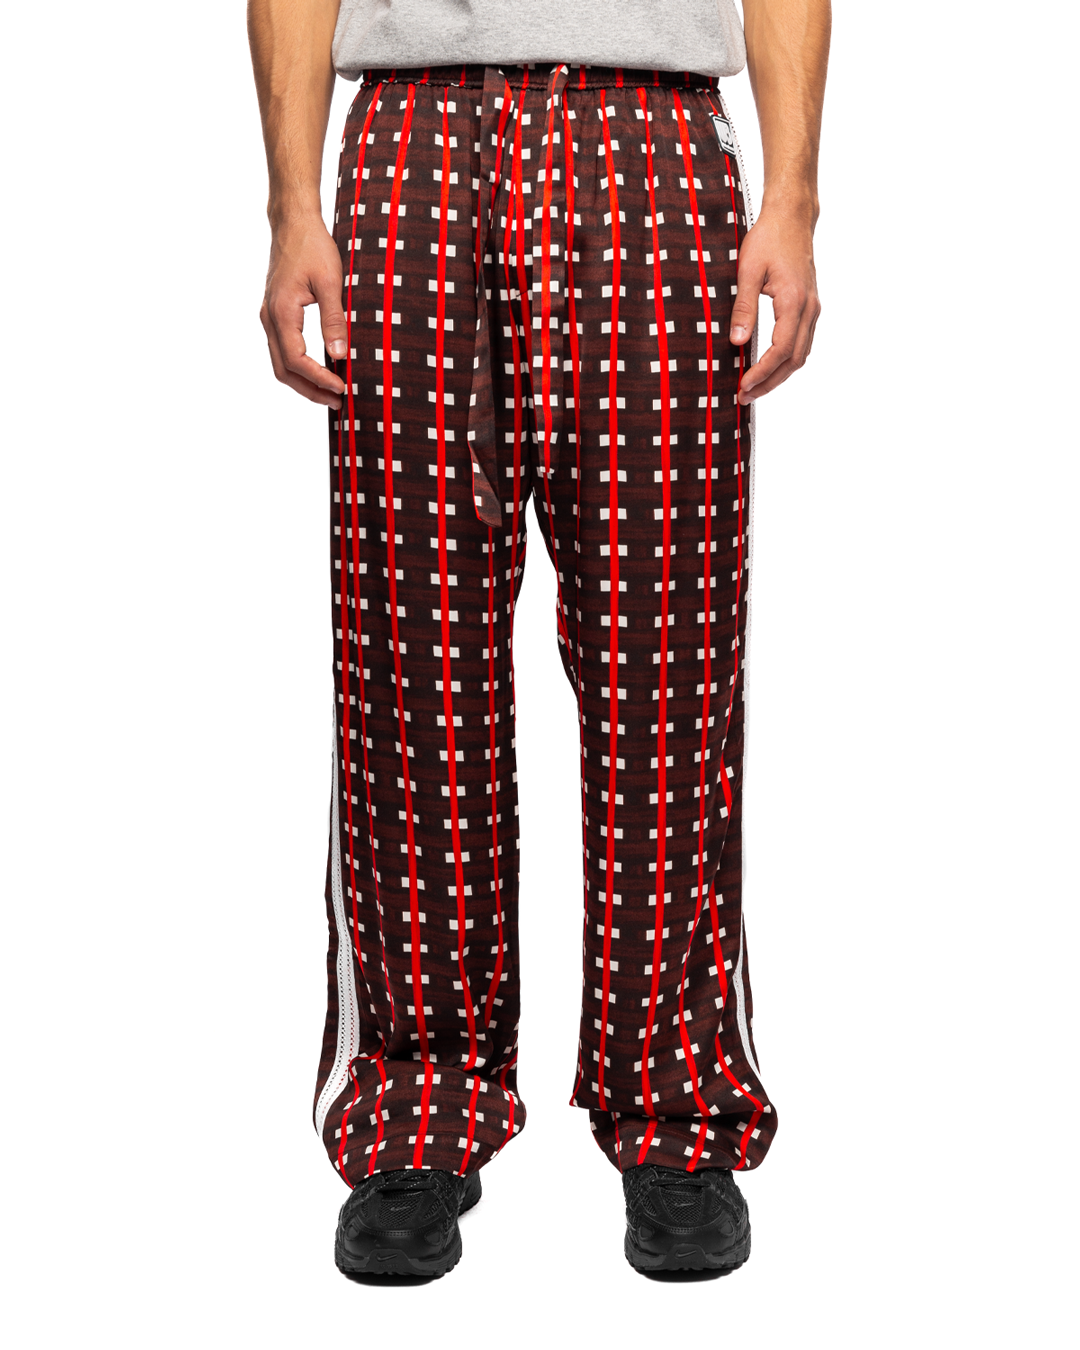 Snare Trousers Viscose Print Brown/Red